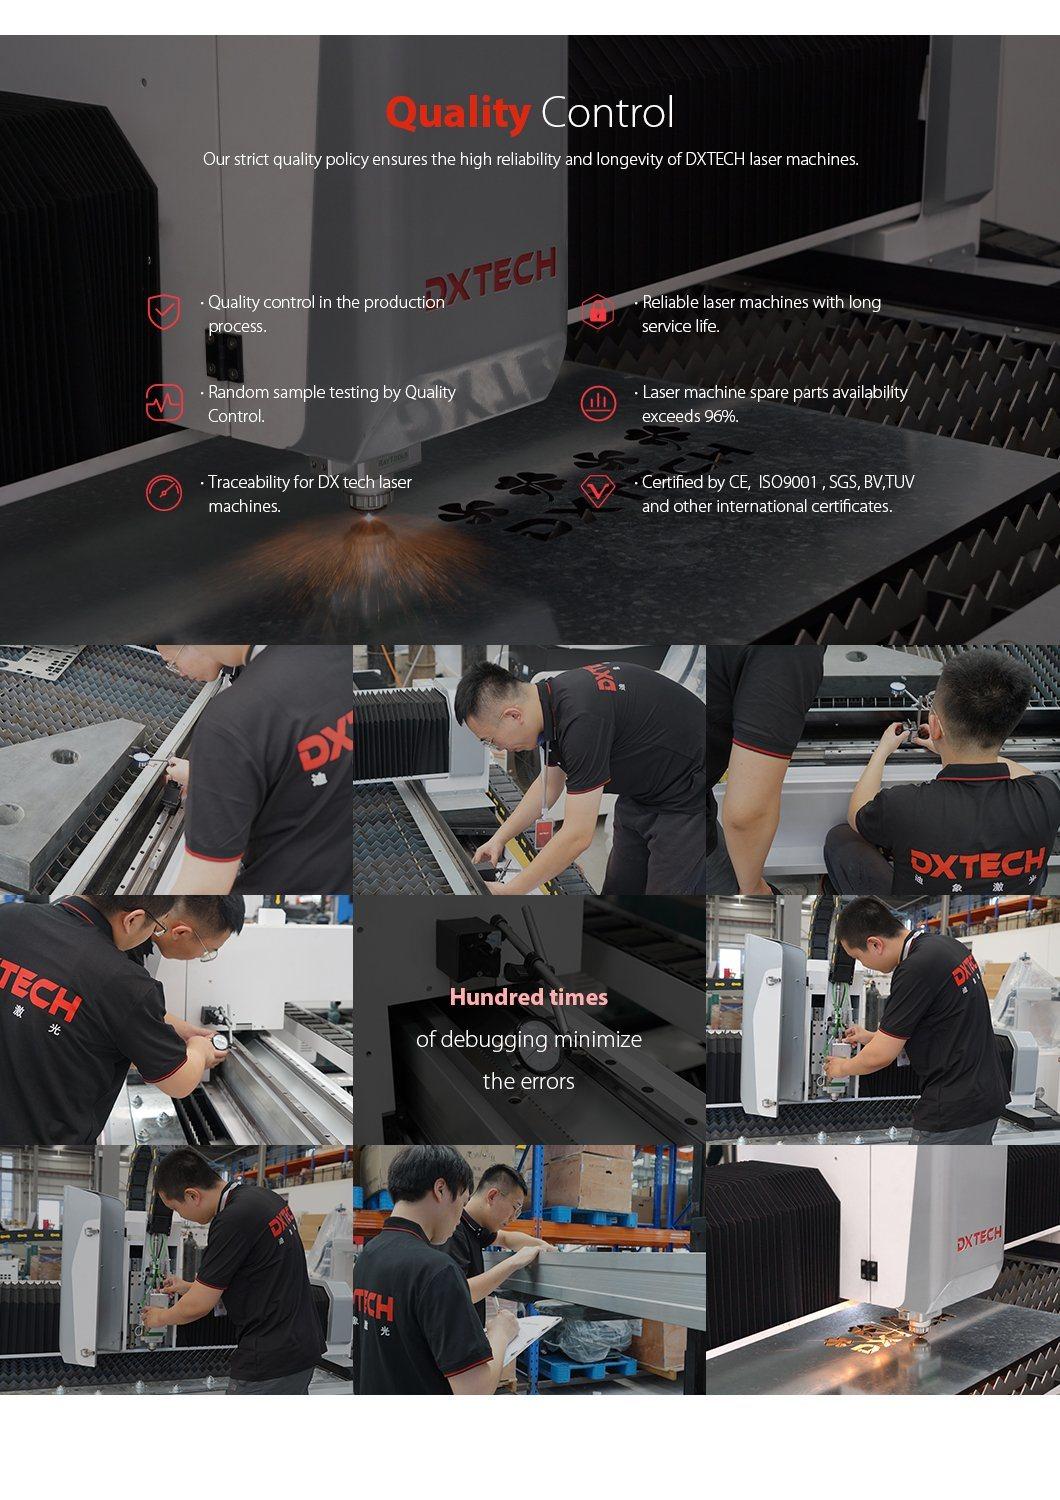 Metal Tube Fiber Laser Cutting Machine for Stainless Steel Carbon Steel Aluminum with 1500W